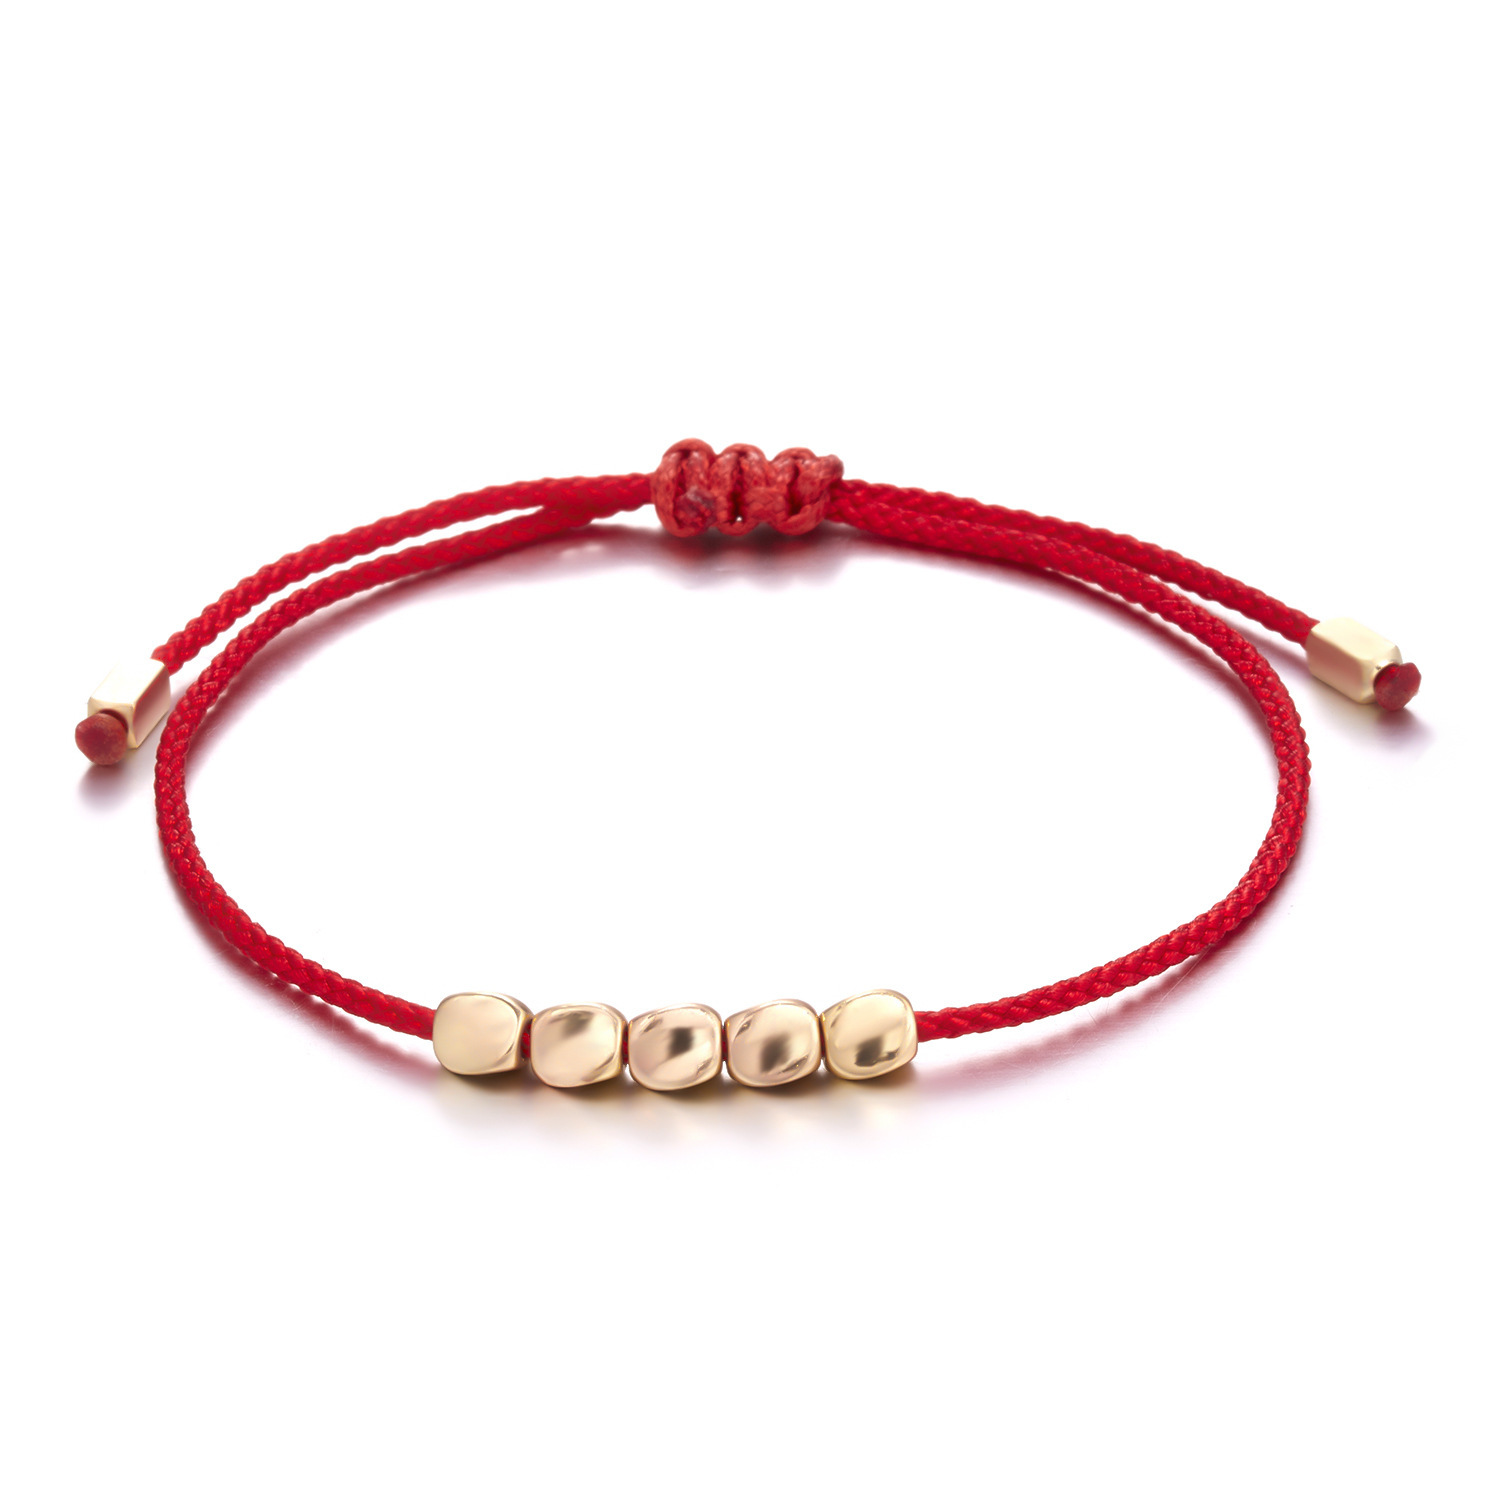 4:5 red strings with copper beads